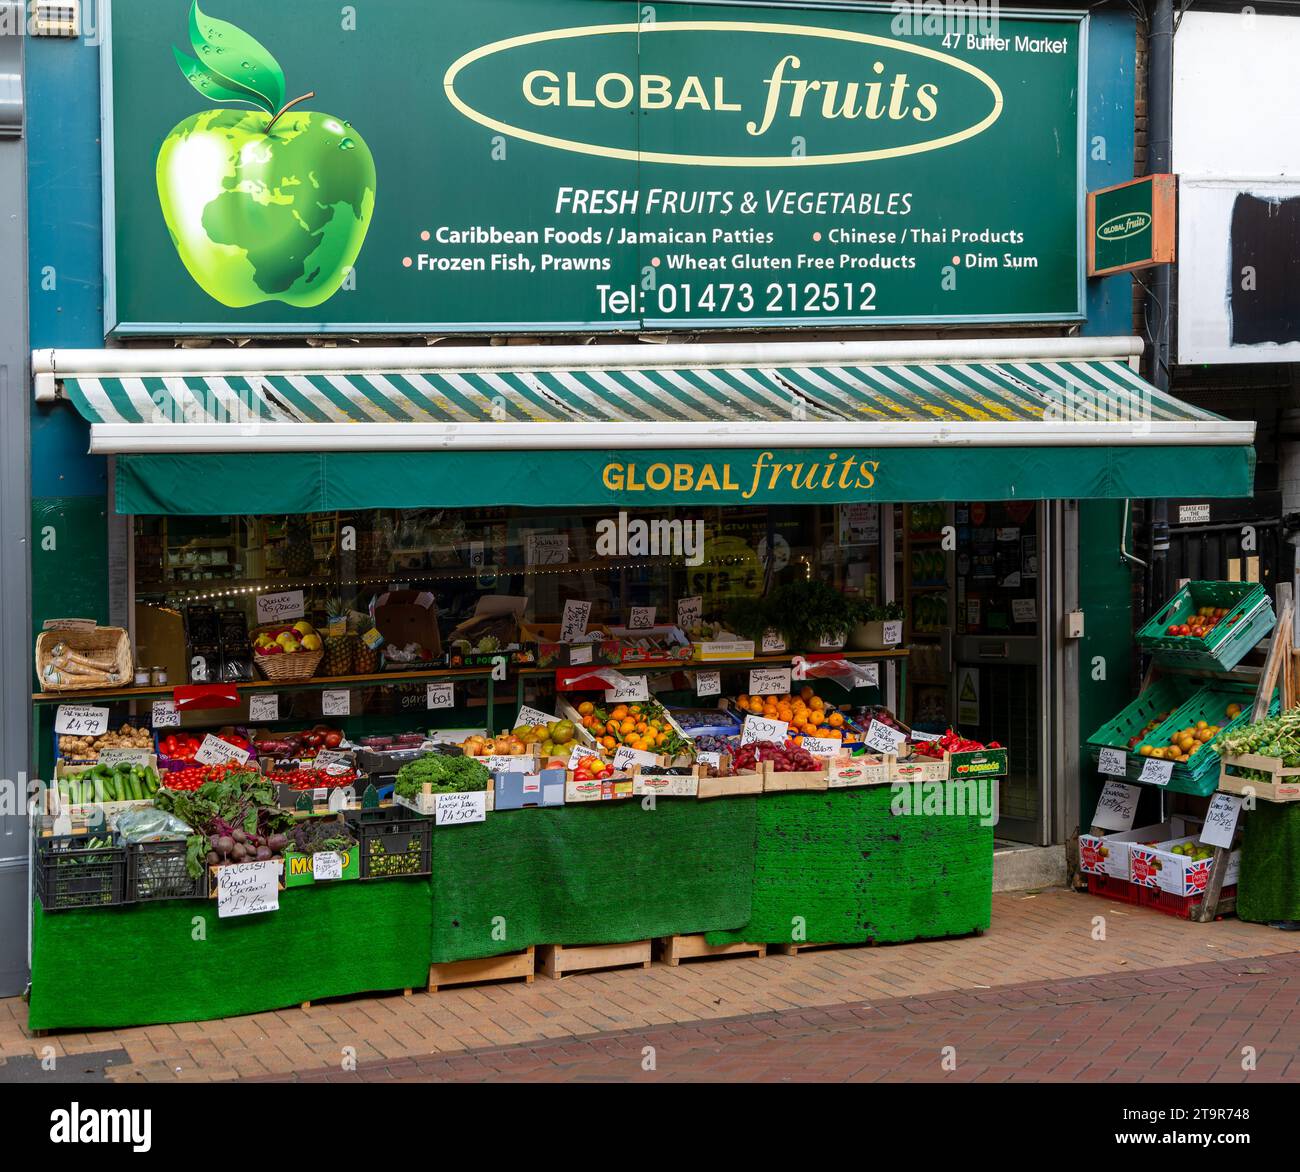 Greengrocer shop in town centre, Global Fruits, Ipswich, Suffolk, England, UK Stock Photo